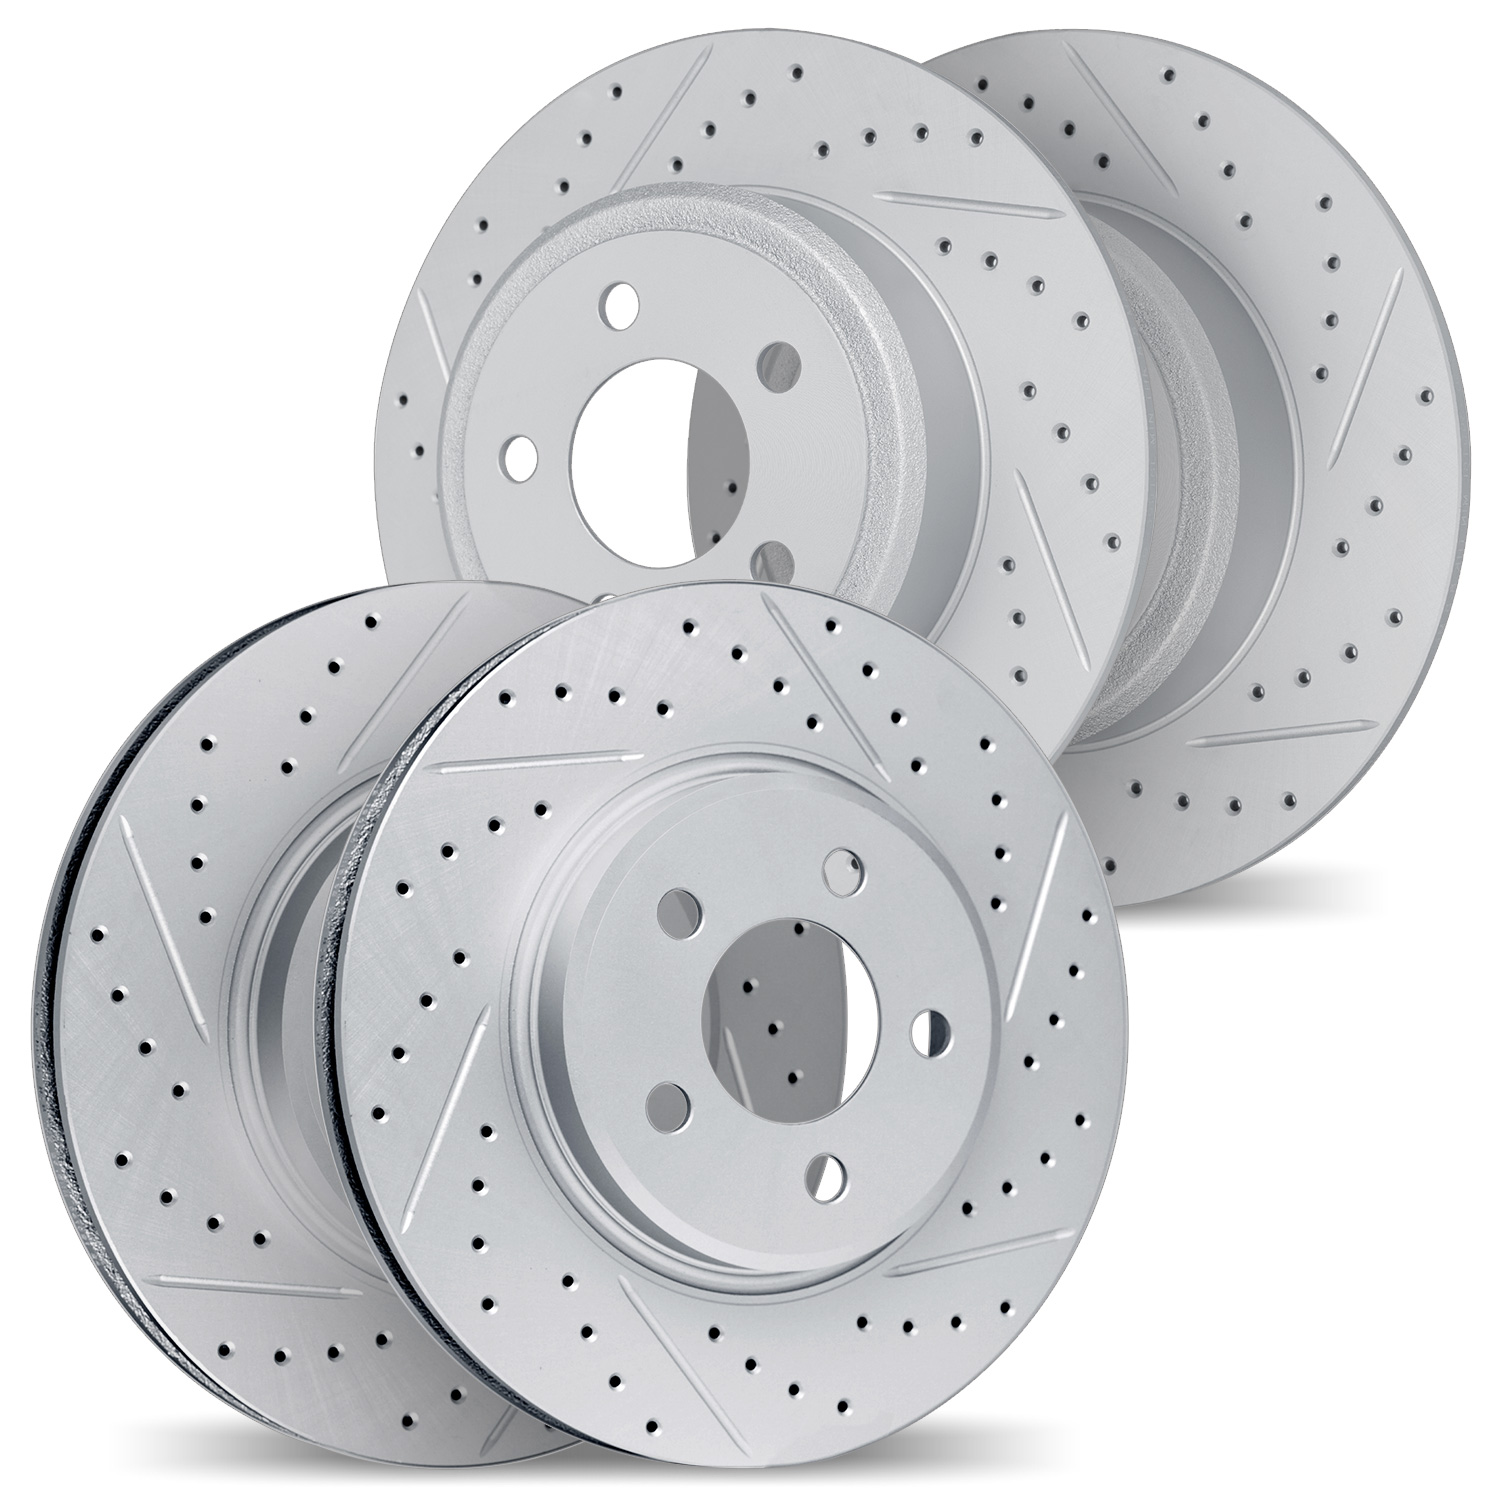 2004-03038 Geoperformance Drilled/Slotted Brake Rotors, 2001-2006 Kia/Hyundai/Genesis, Position: Front and Rear